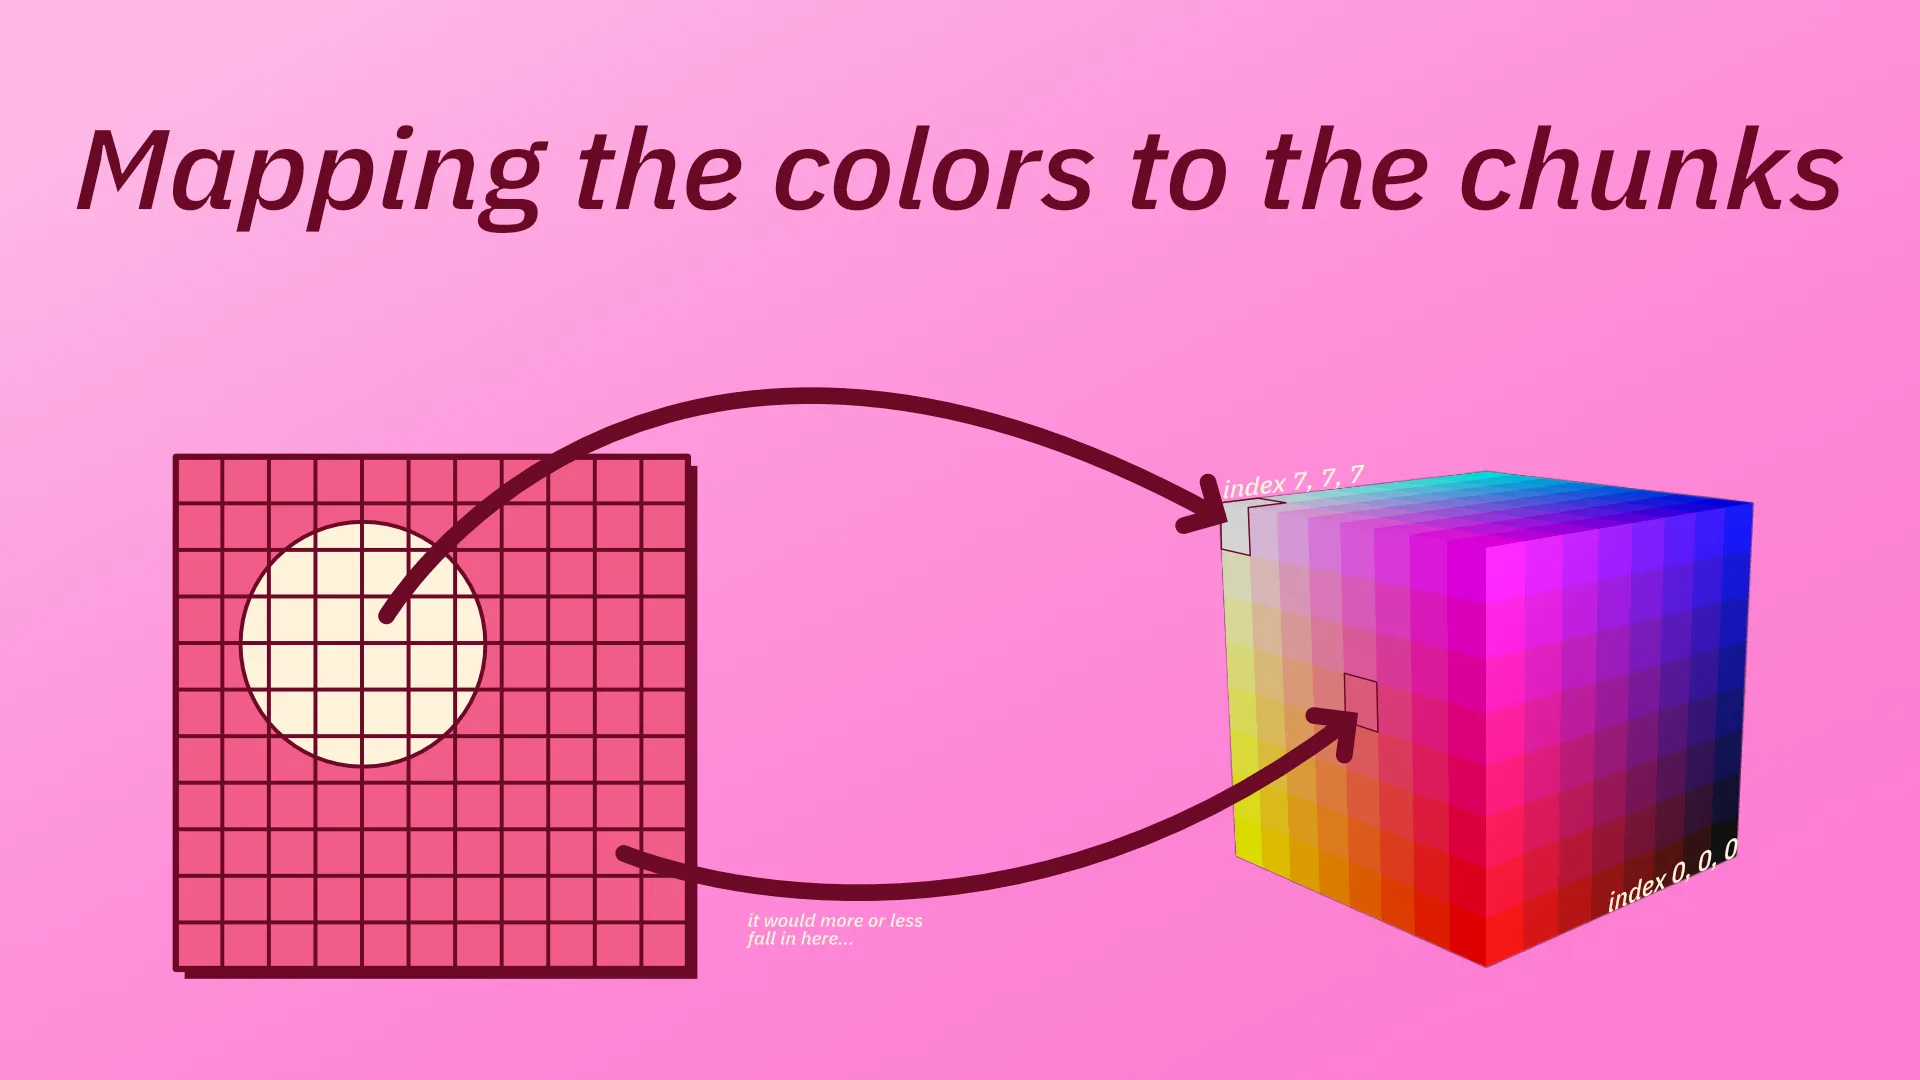 Mapping colors